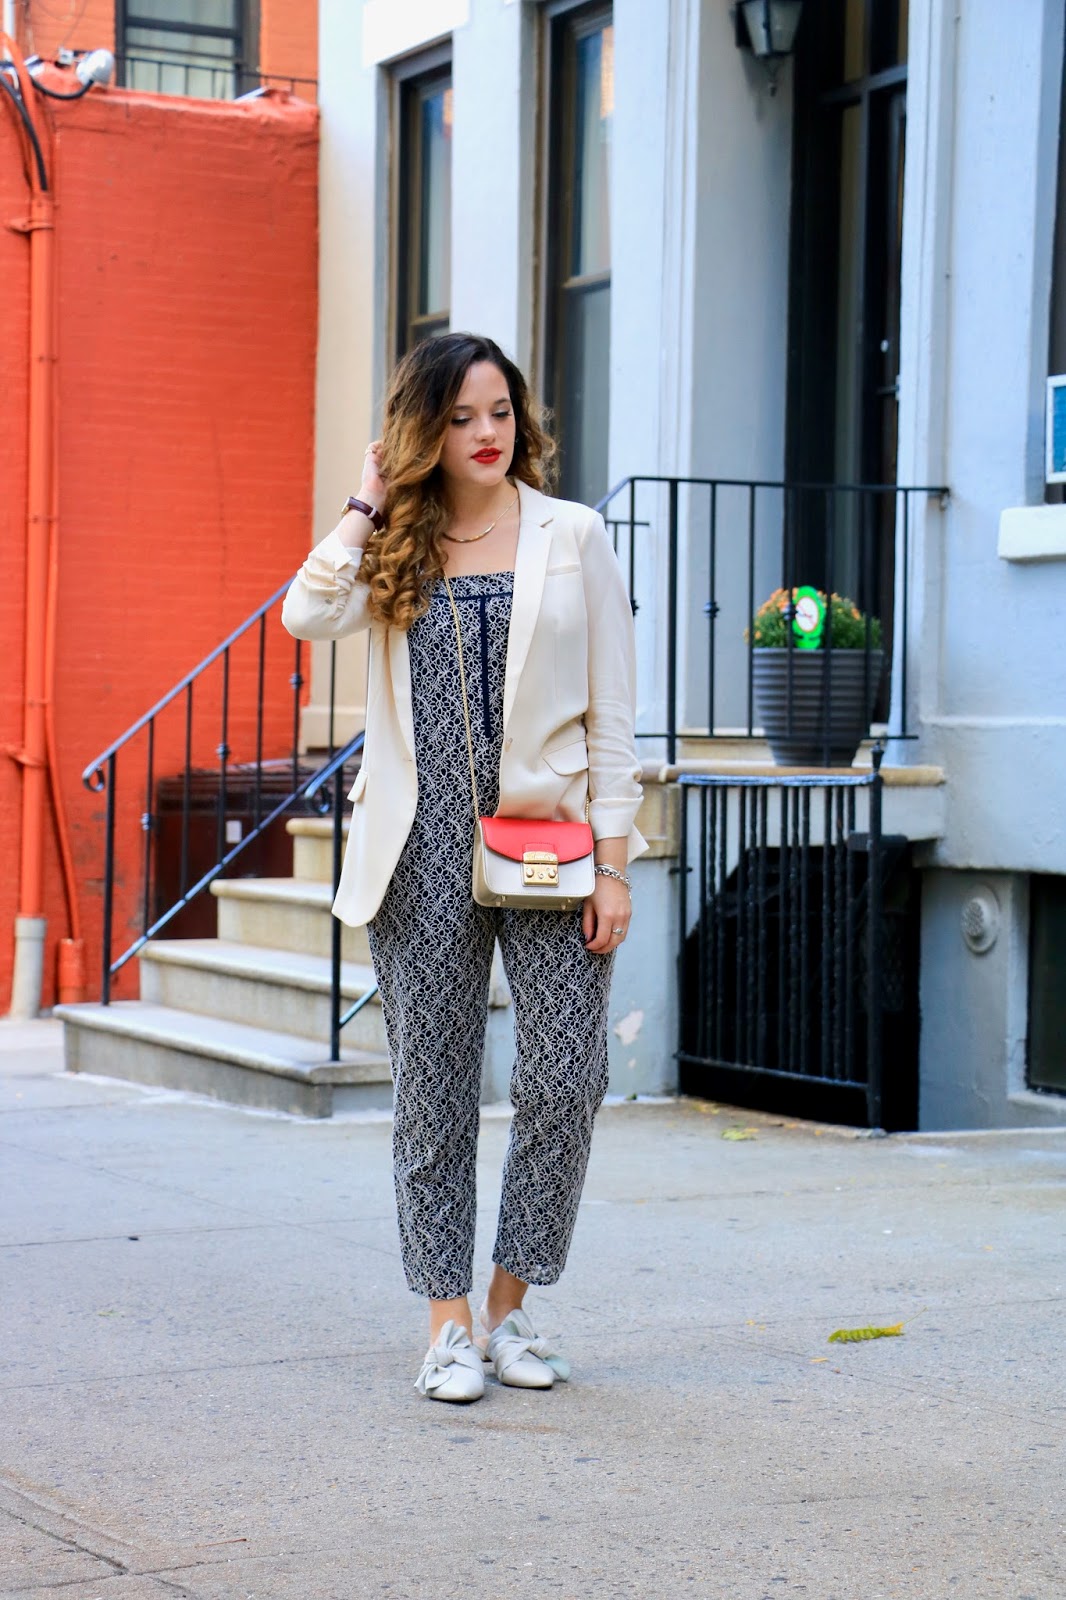 NYC fashion blogger Kathleen Harper showing how to wear a jumpsuit